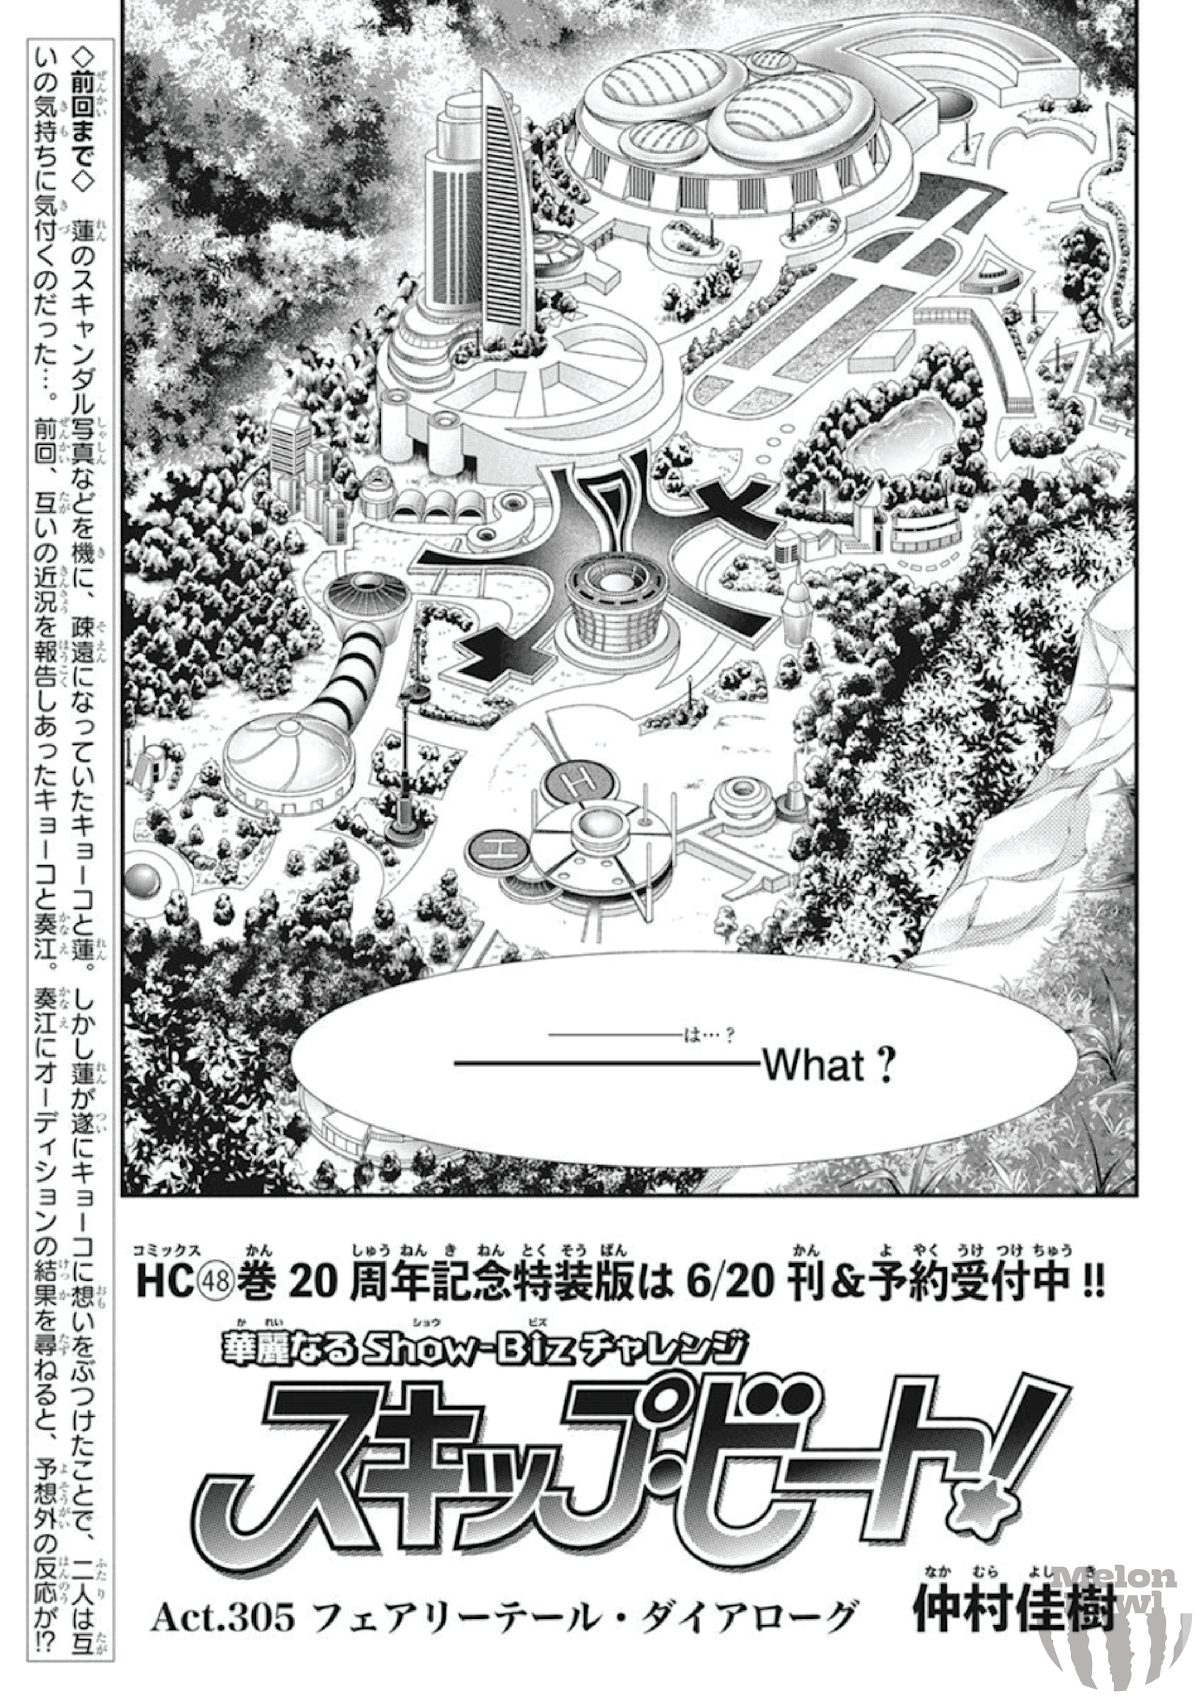 Skip Beat!, Chapter 305 Fairytale Dialogue image 02